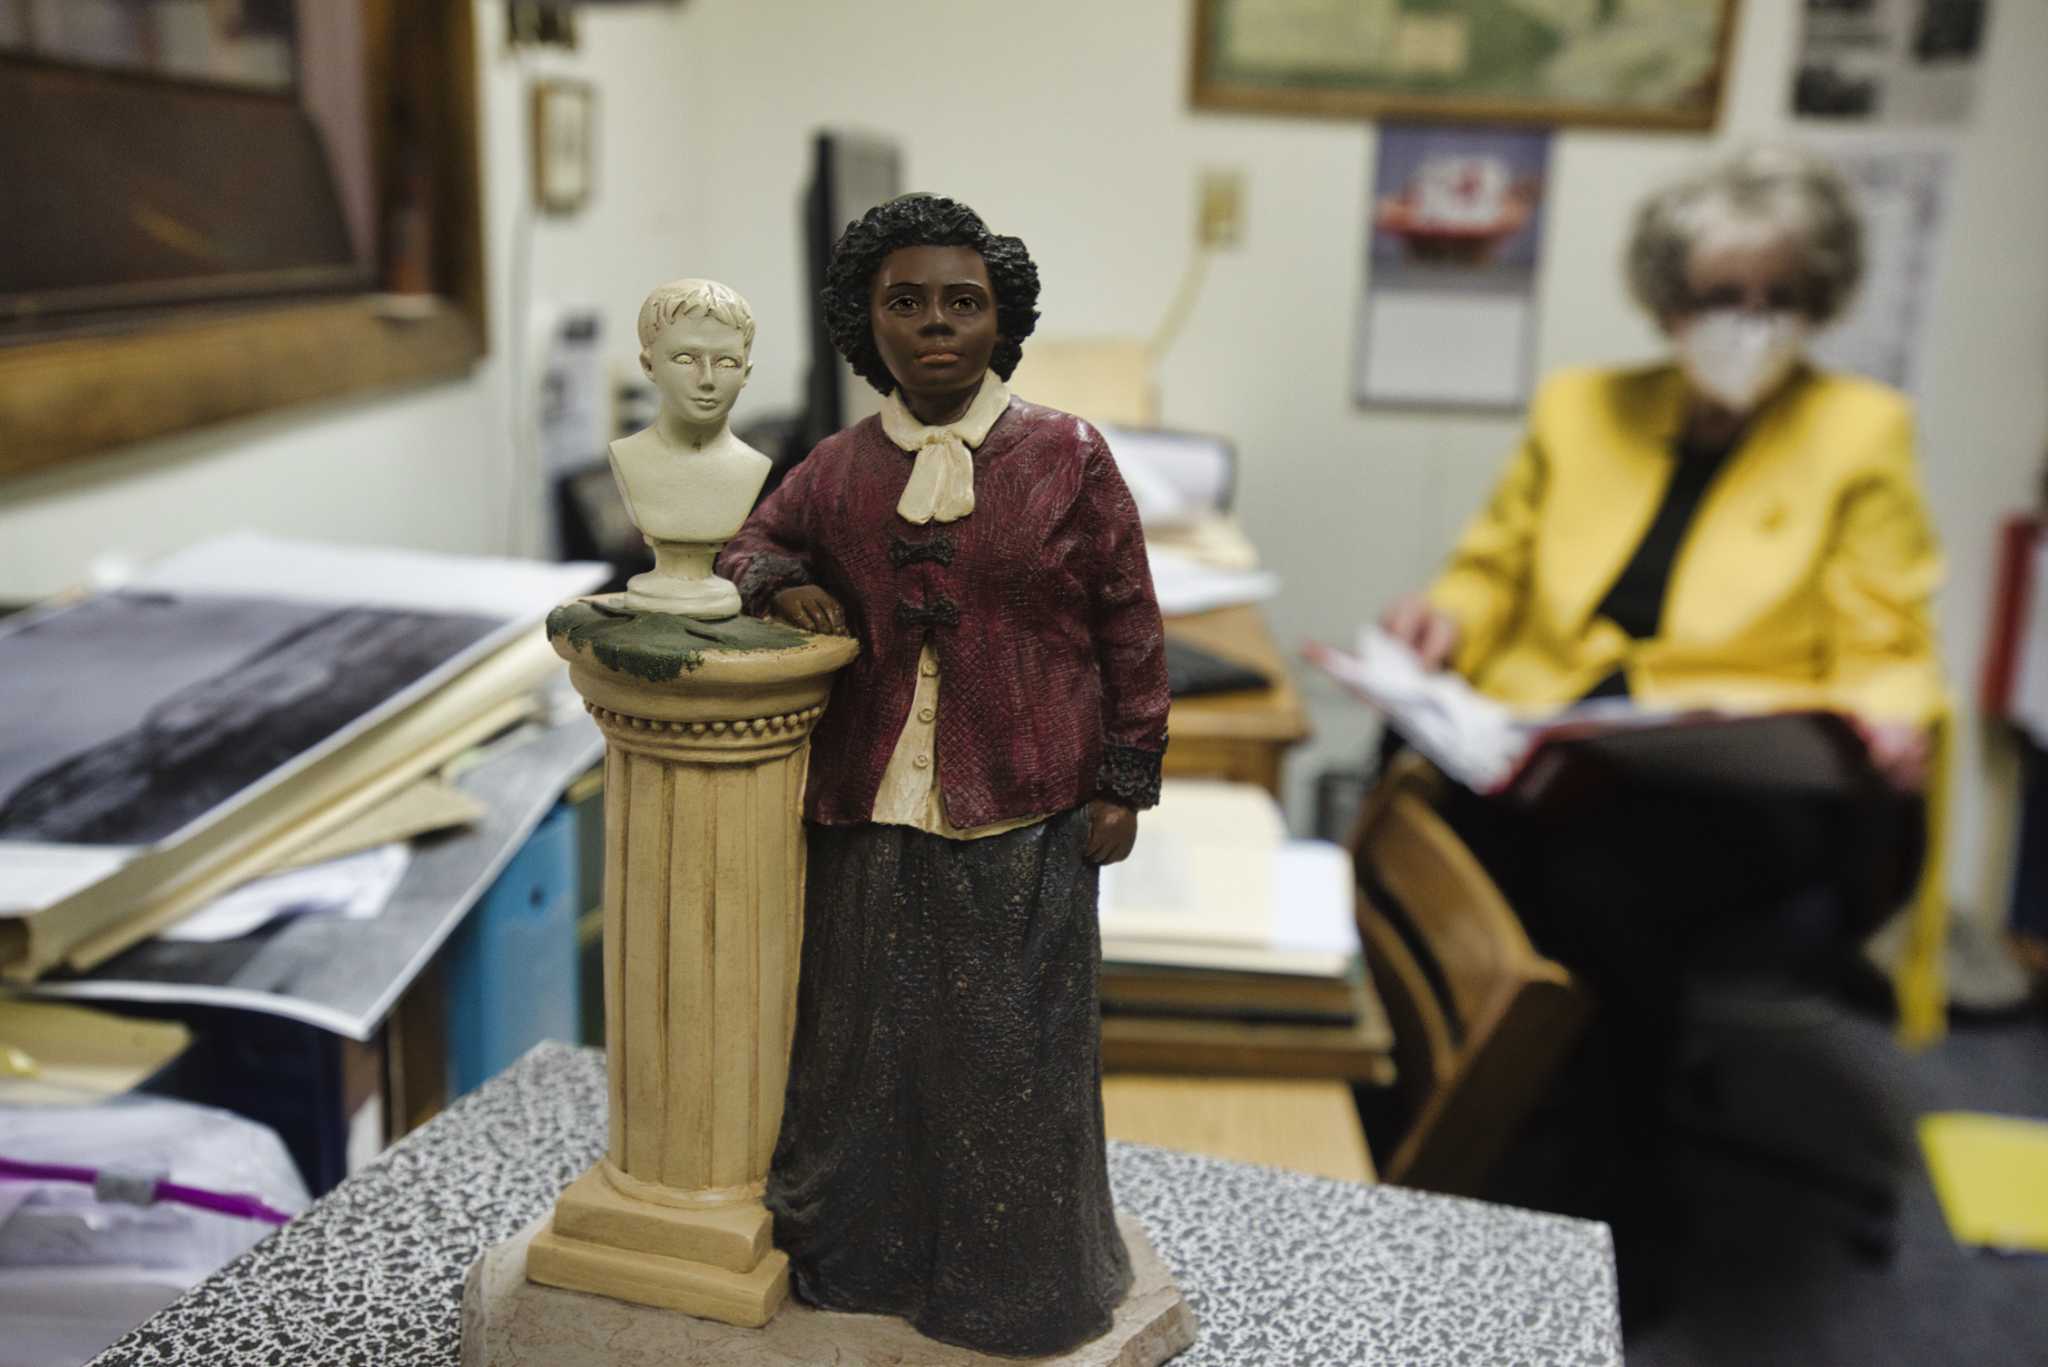 U.S. Postage Stamp Will Honor Edmonia Lewis, a Sculptor Who Broke